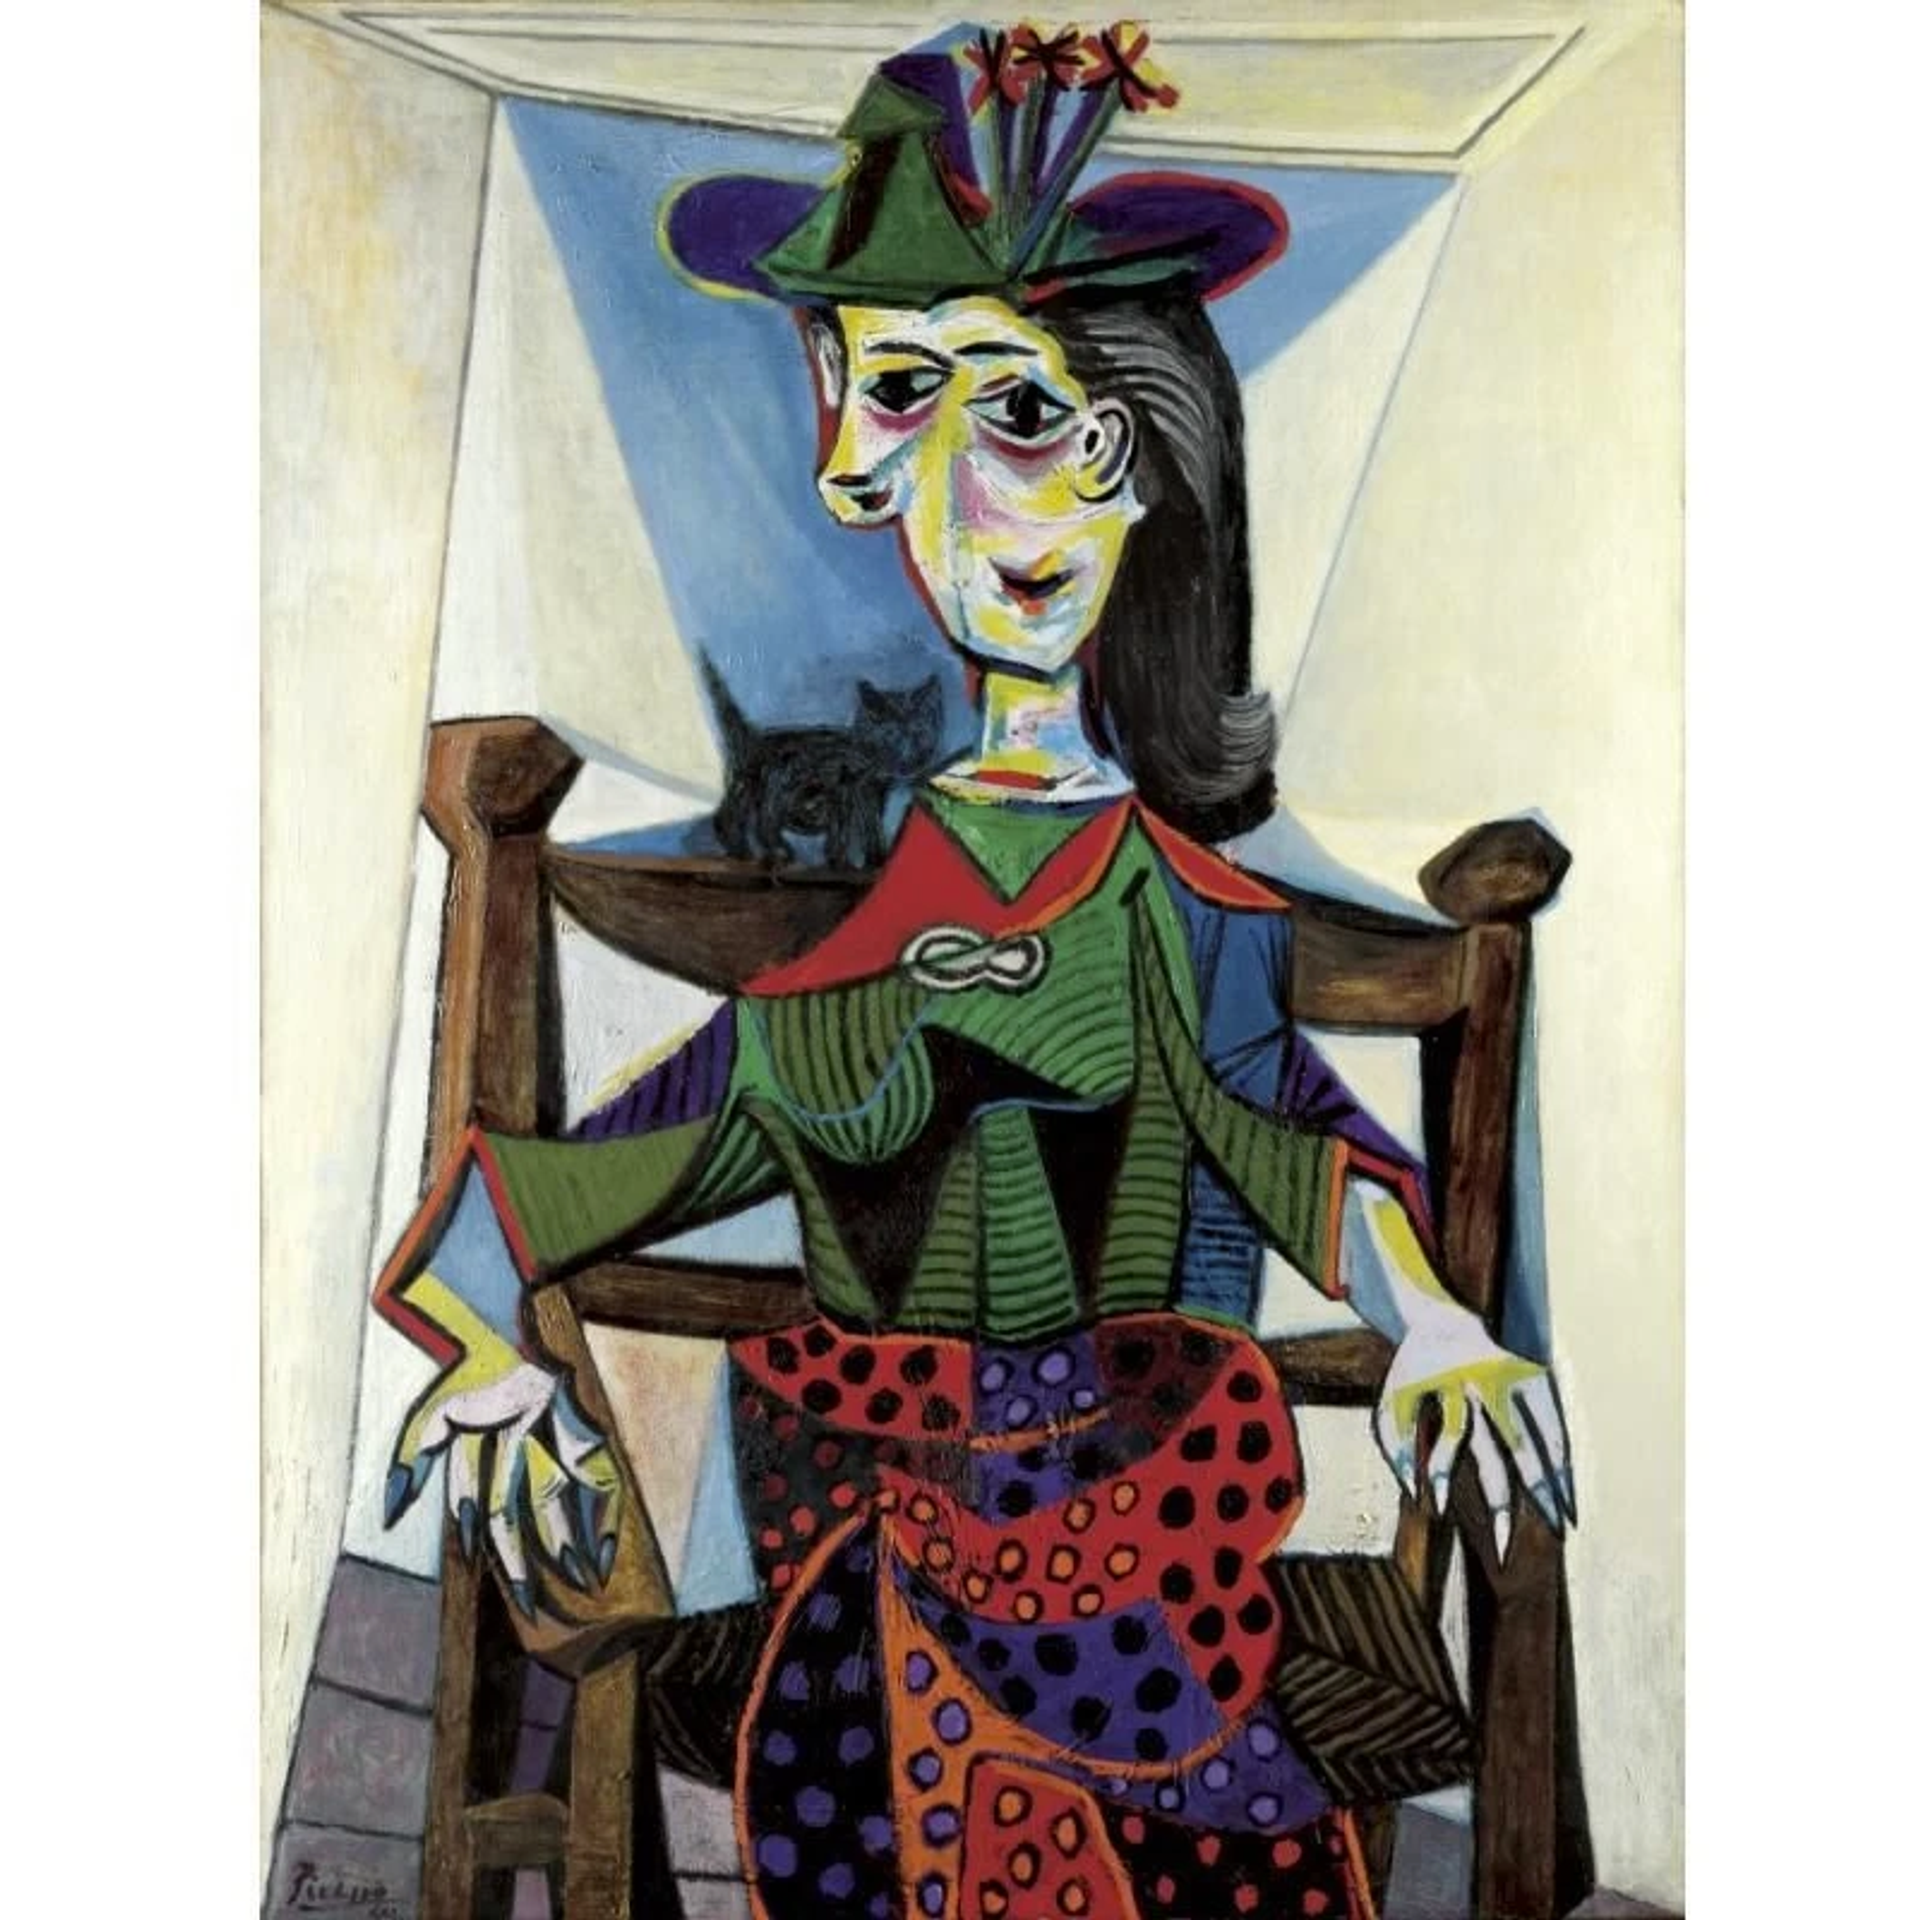 Painting by Pablo Picasso depicting Dora Maar, the artist's lover, seated on a chair with a small cat perched on her shoulders.